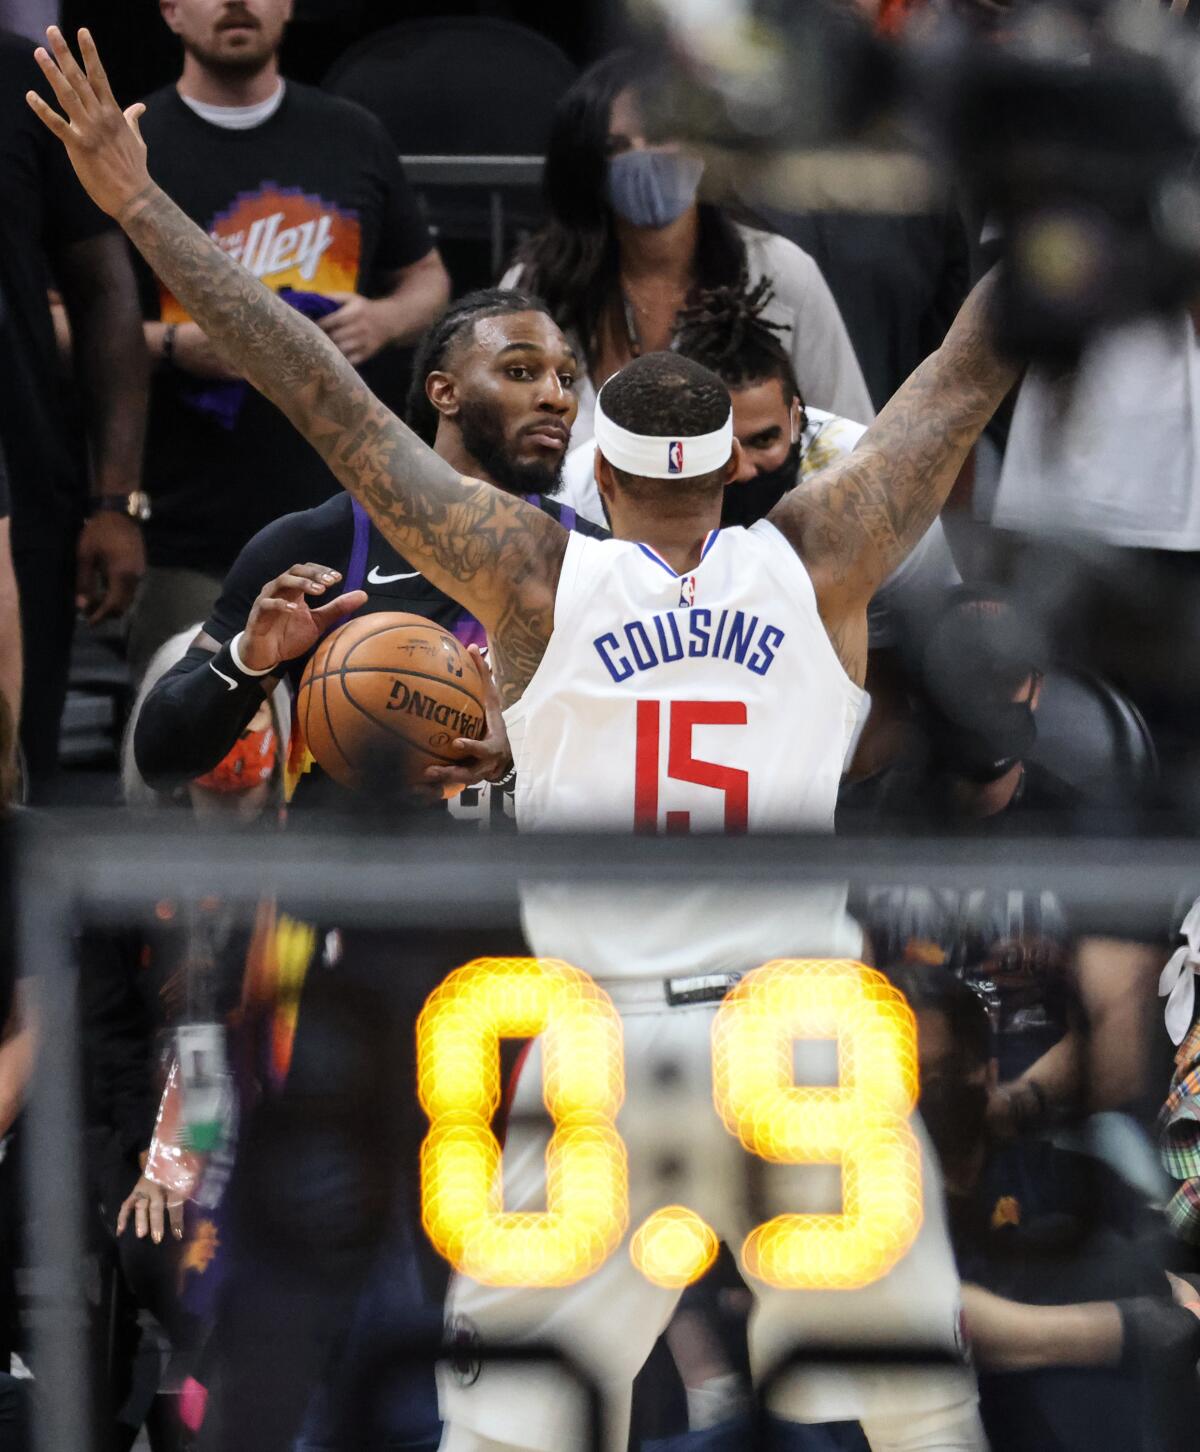 Phoenix Suns forward Jae Crowder surveys the court as Clippers center DeMarcus Cousins covers him with 0.9 seconds remaining.